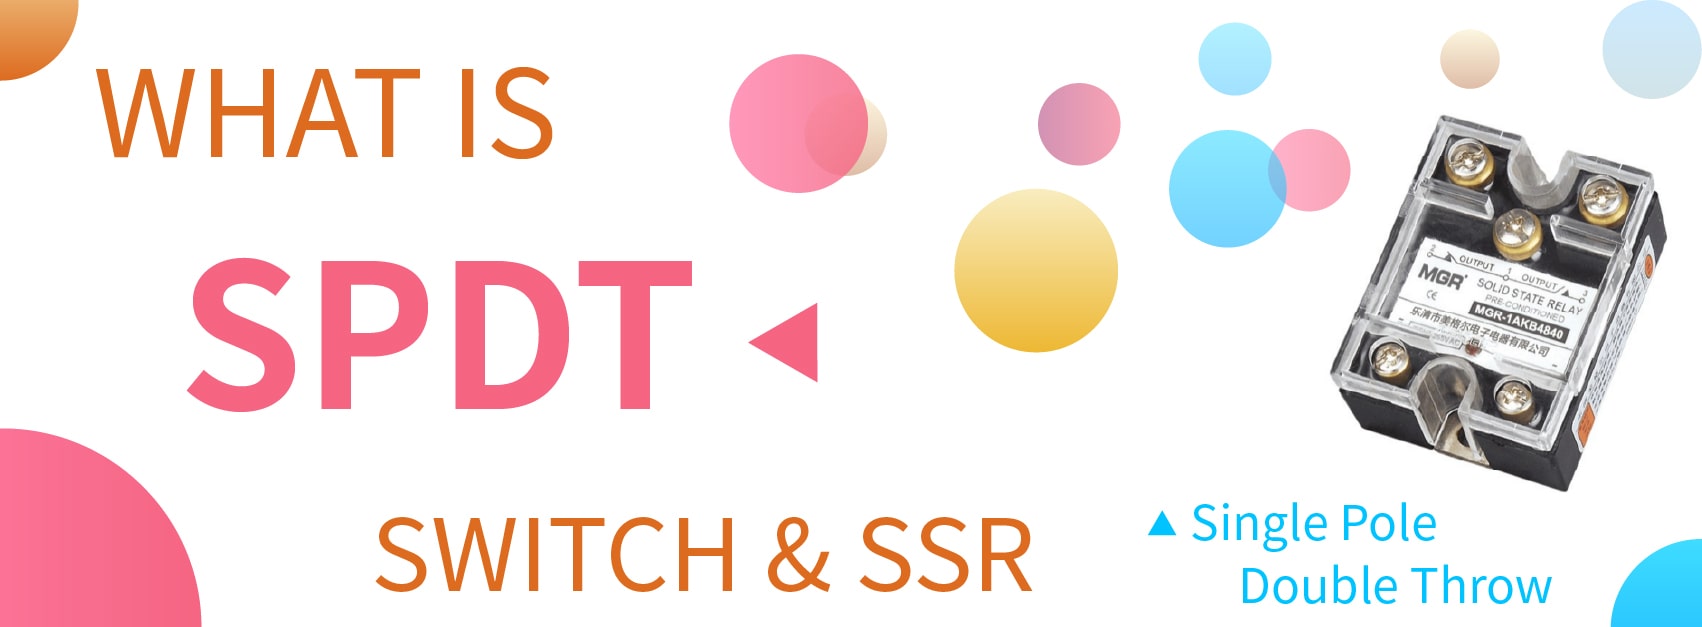 What is SPDT Switch and SPDT SSR? banner